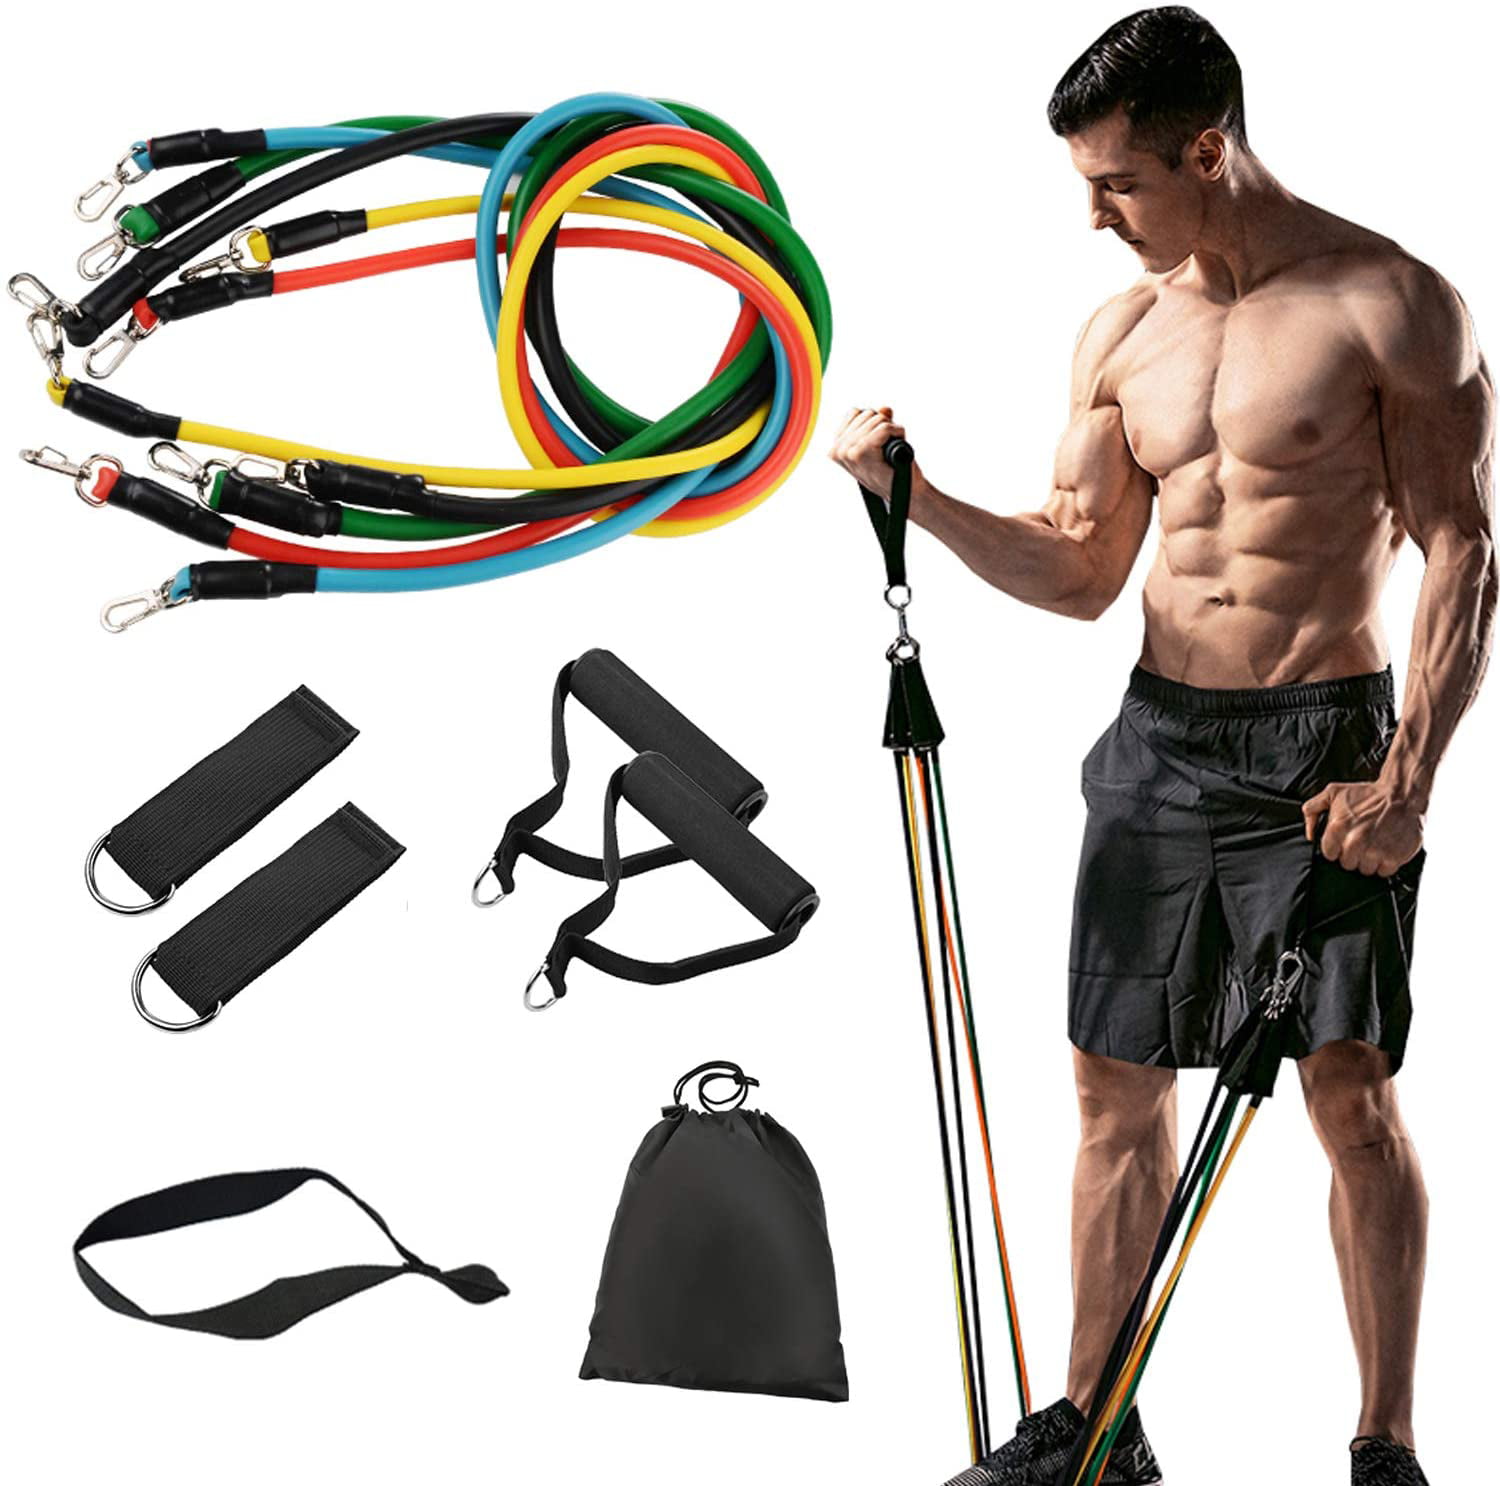 Resistance Bands Loop Kit Weights Home Fitness Glutes Gym Workout Set Singles